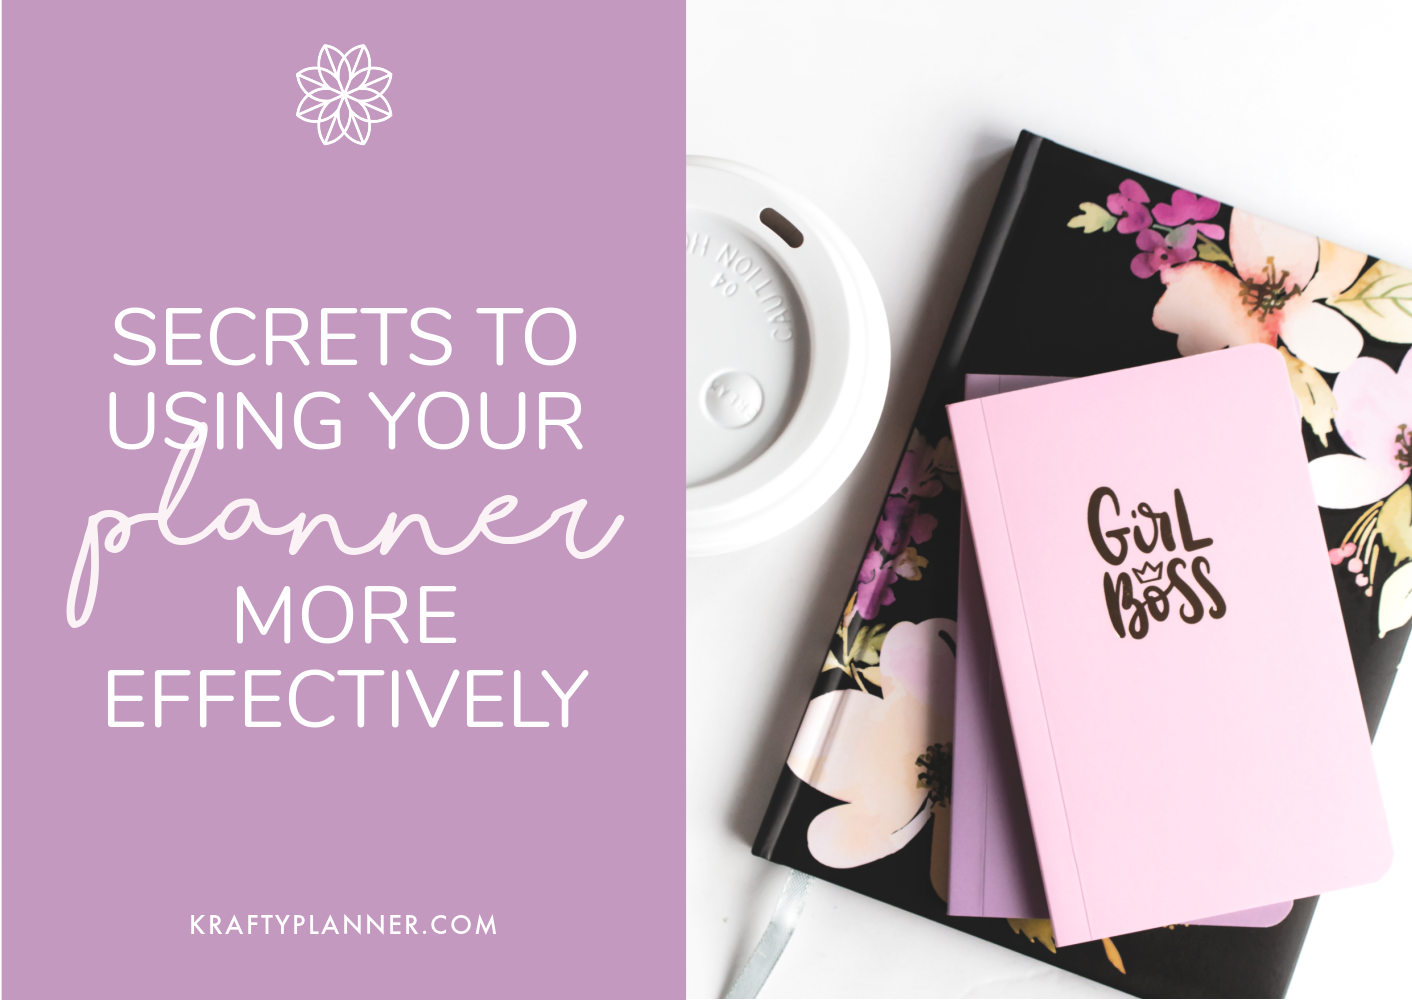 Secrets to Using Your Planner More Effectively